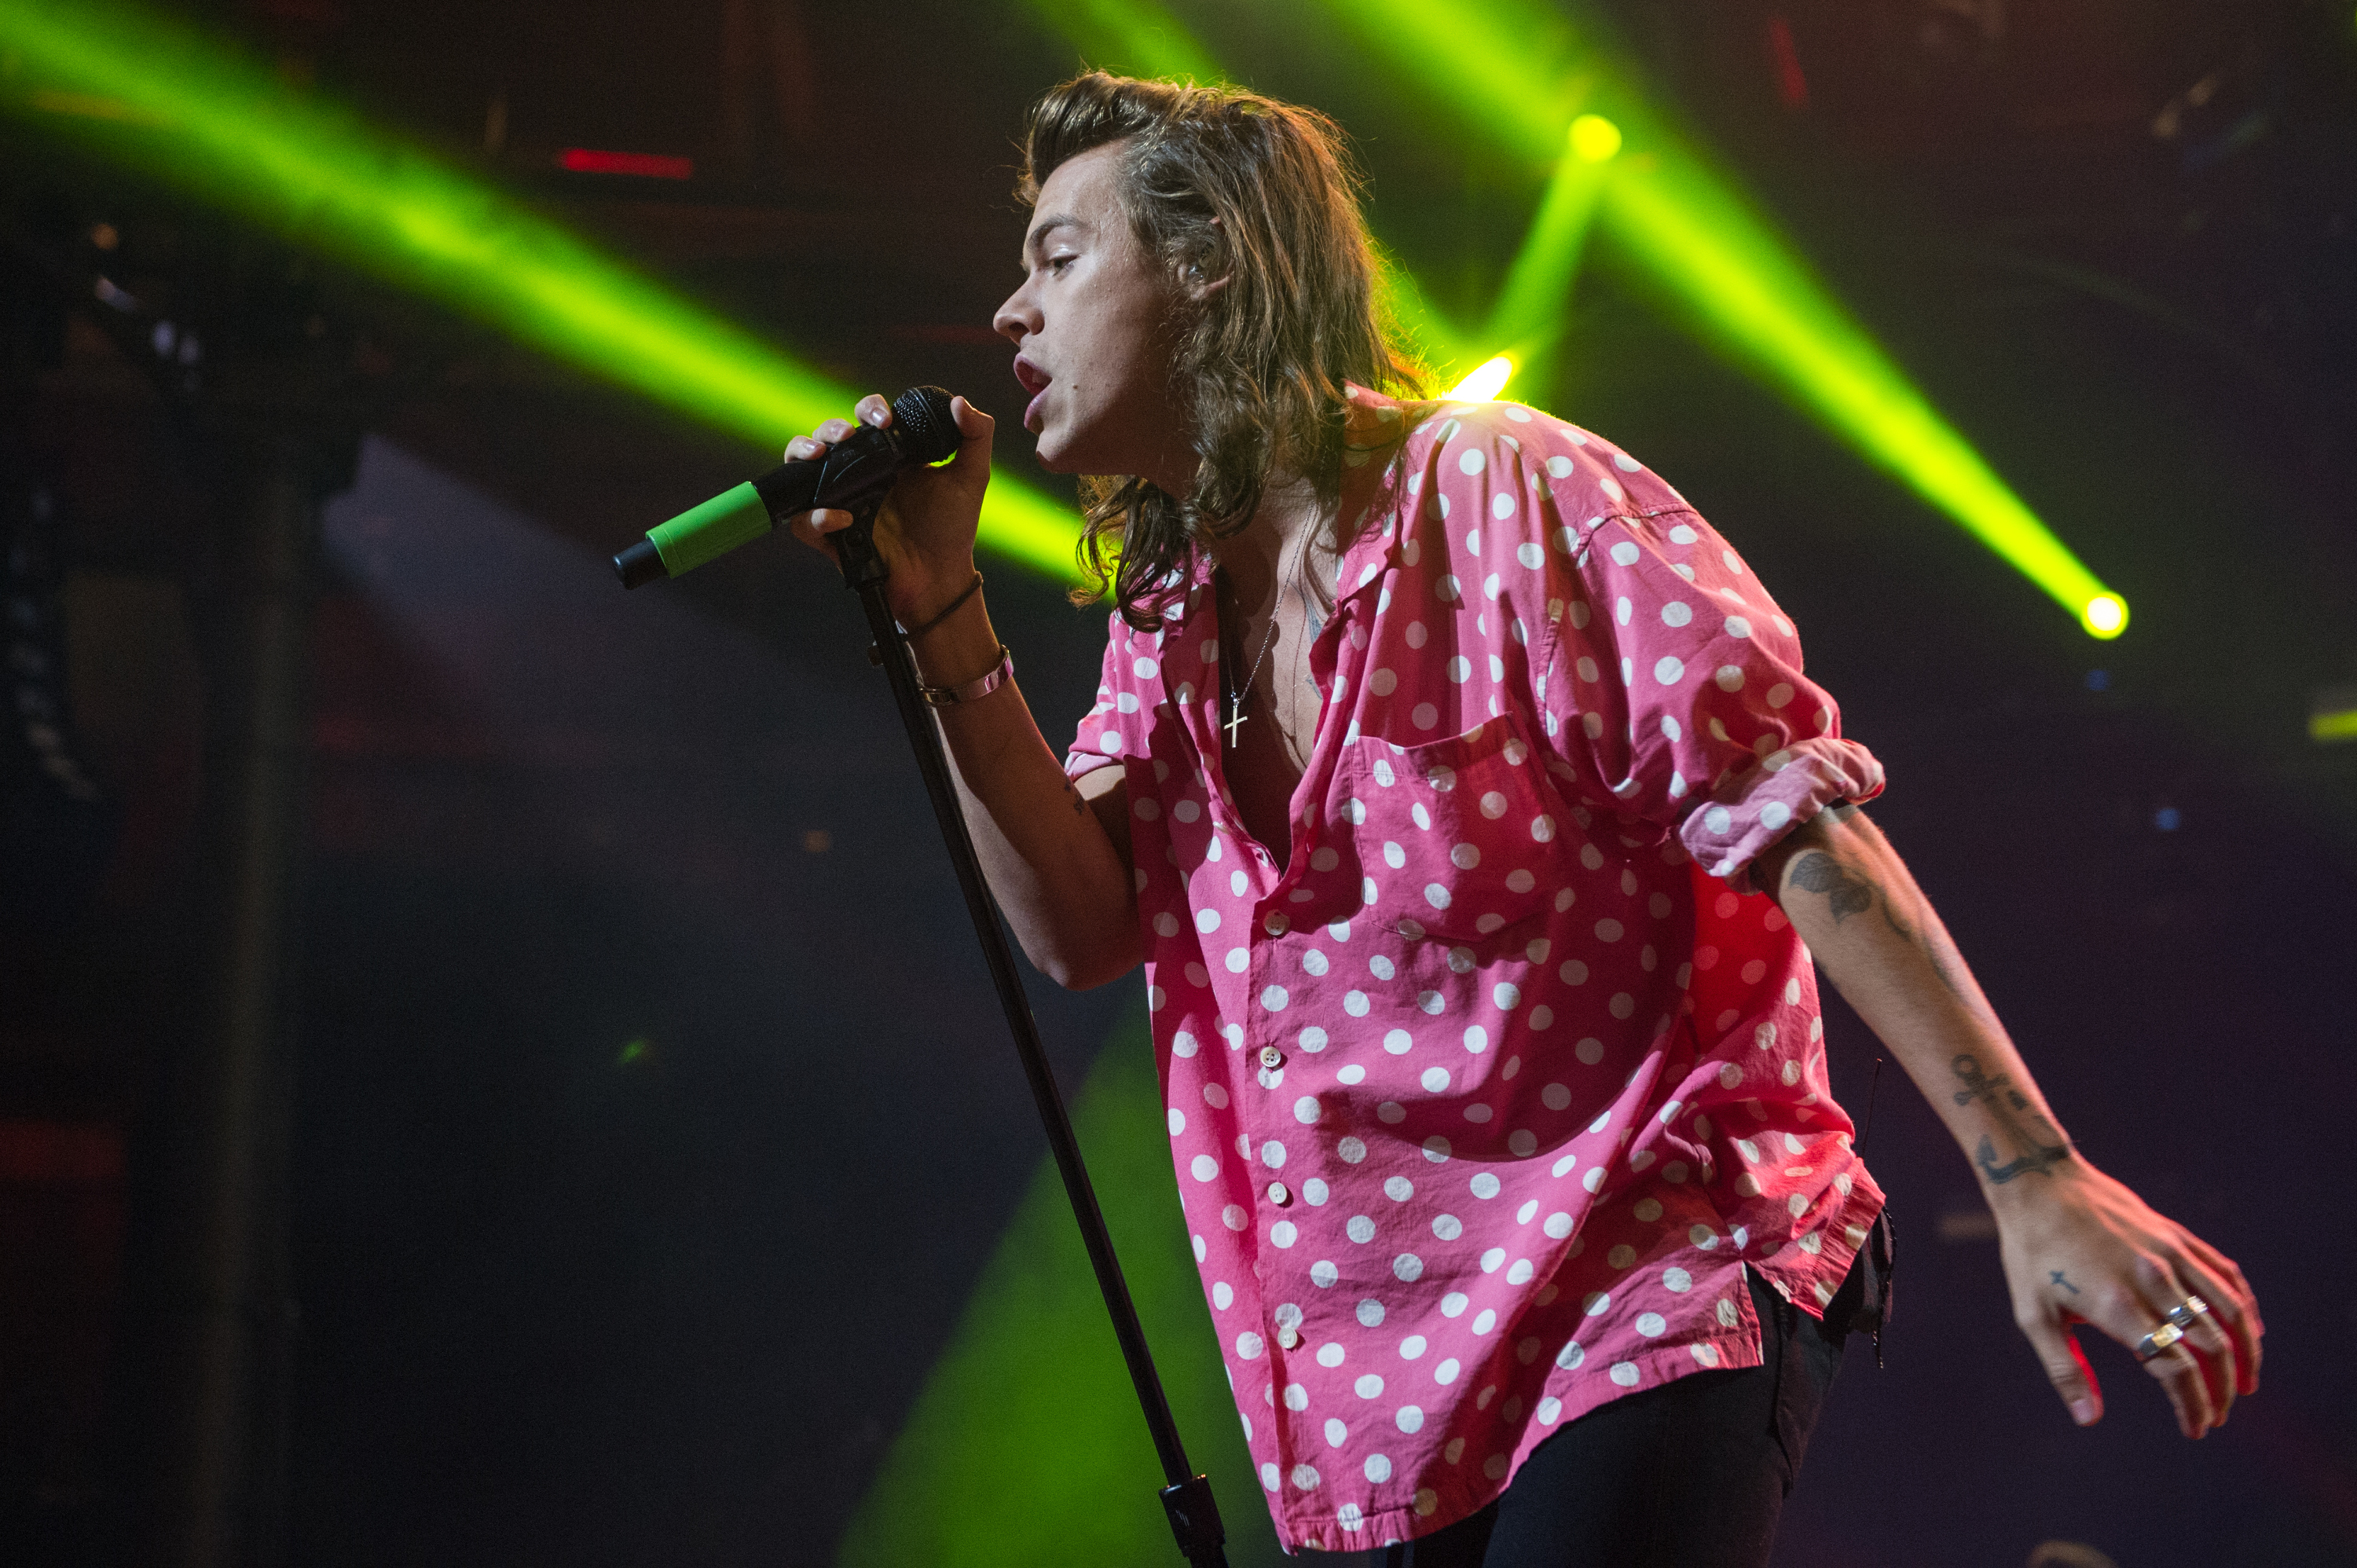 LONDON, ENGLAND - SEPTEMBER 22:  Harry Styles of One Direction performs at The Roundhouse on September 22, 2015 in London, England.  (Photo by Brian Rasic/WireImage) (Brian Rasic&mdash;WireImage)